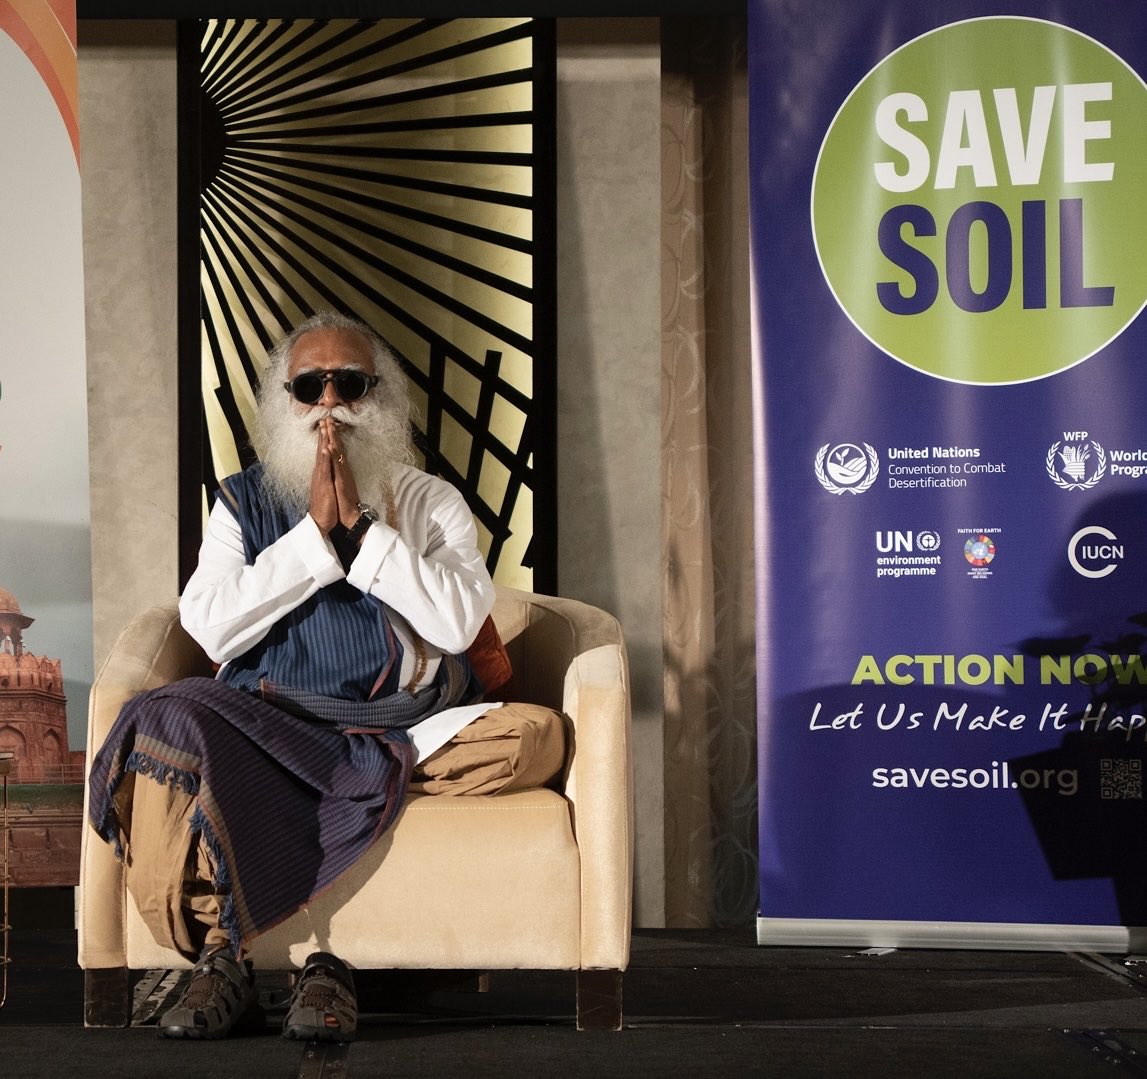 “Raise your voice and stand up for soil. If we act now, in the next decade we can significantly turn things around. This our responsibility as a generation and an immense privilege. Let’s make it happen.” #SaveSoil savesoil.org @cpsavesoil ⁦@SadhguruJV⁩ 🙏🌍🌱